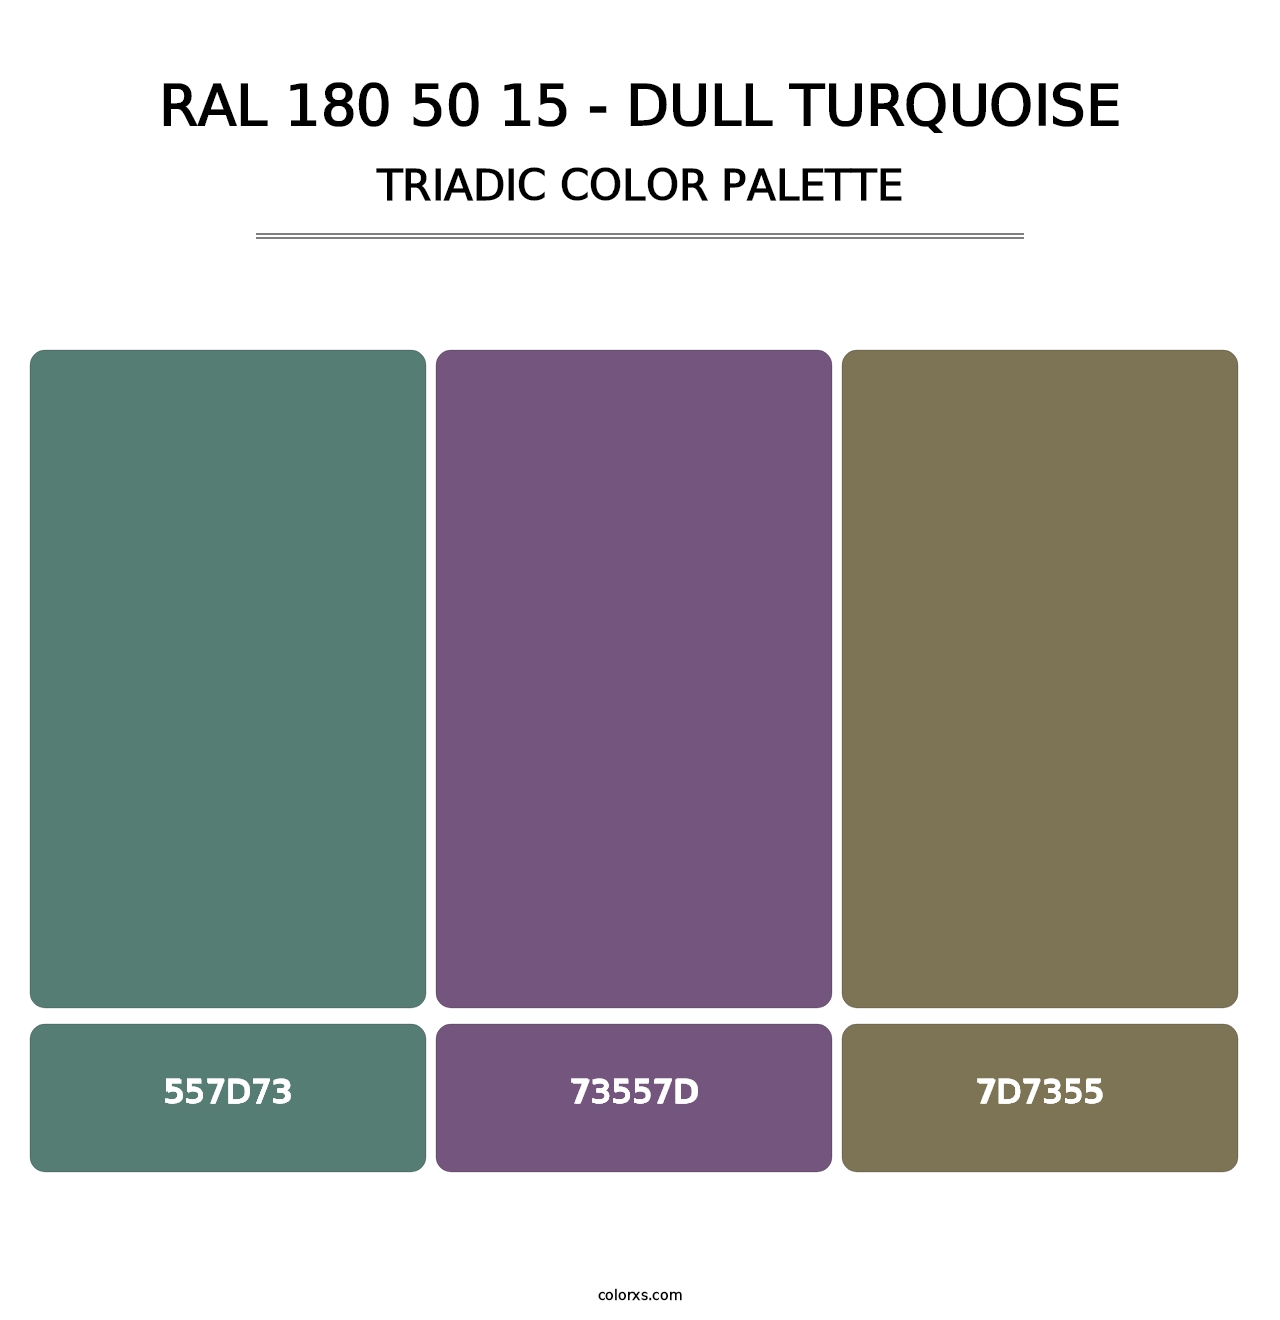 RAL 180 50 15 - Dull Turquoise - Triadic Color Palette